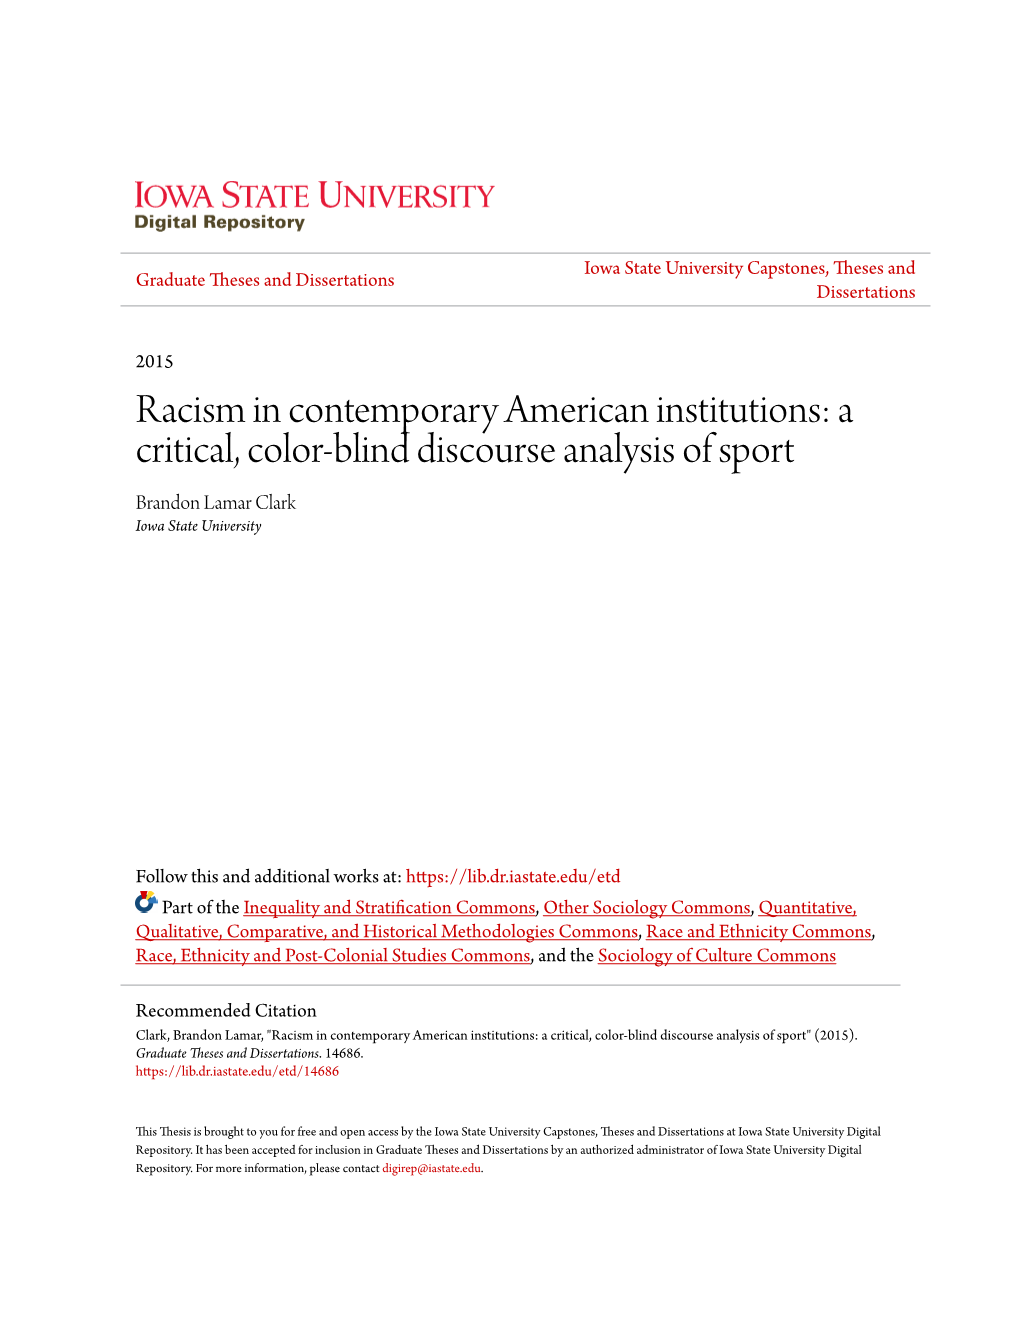 Racism in Contemporary American Institutions: a Critical, Color-Blind Discourse Analysis of Sport Brandon Lamar Clark Iowa State University